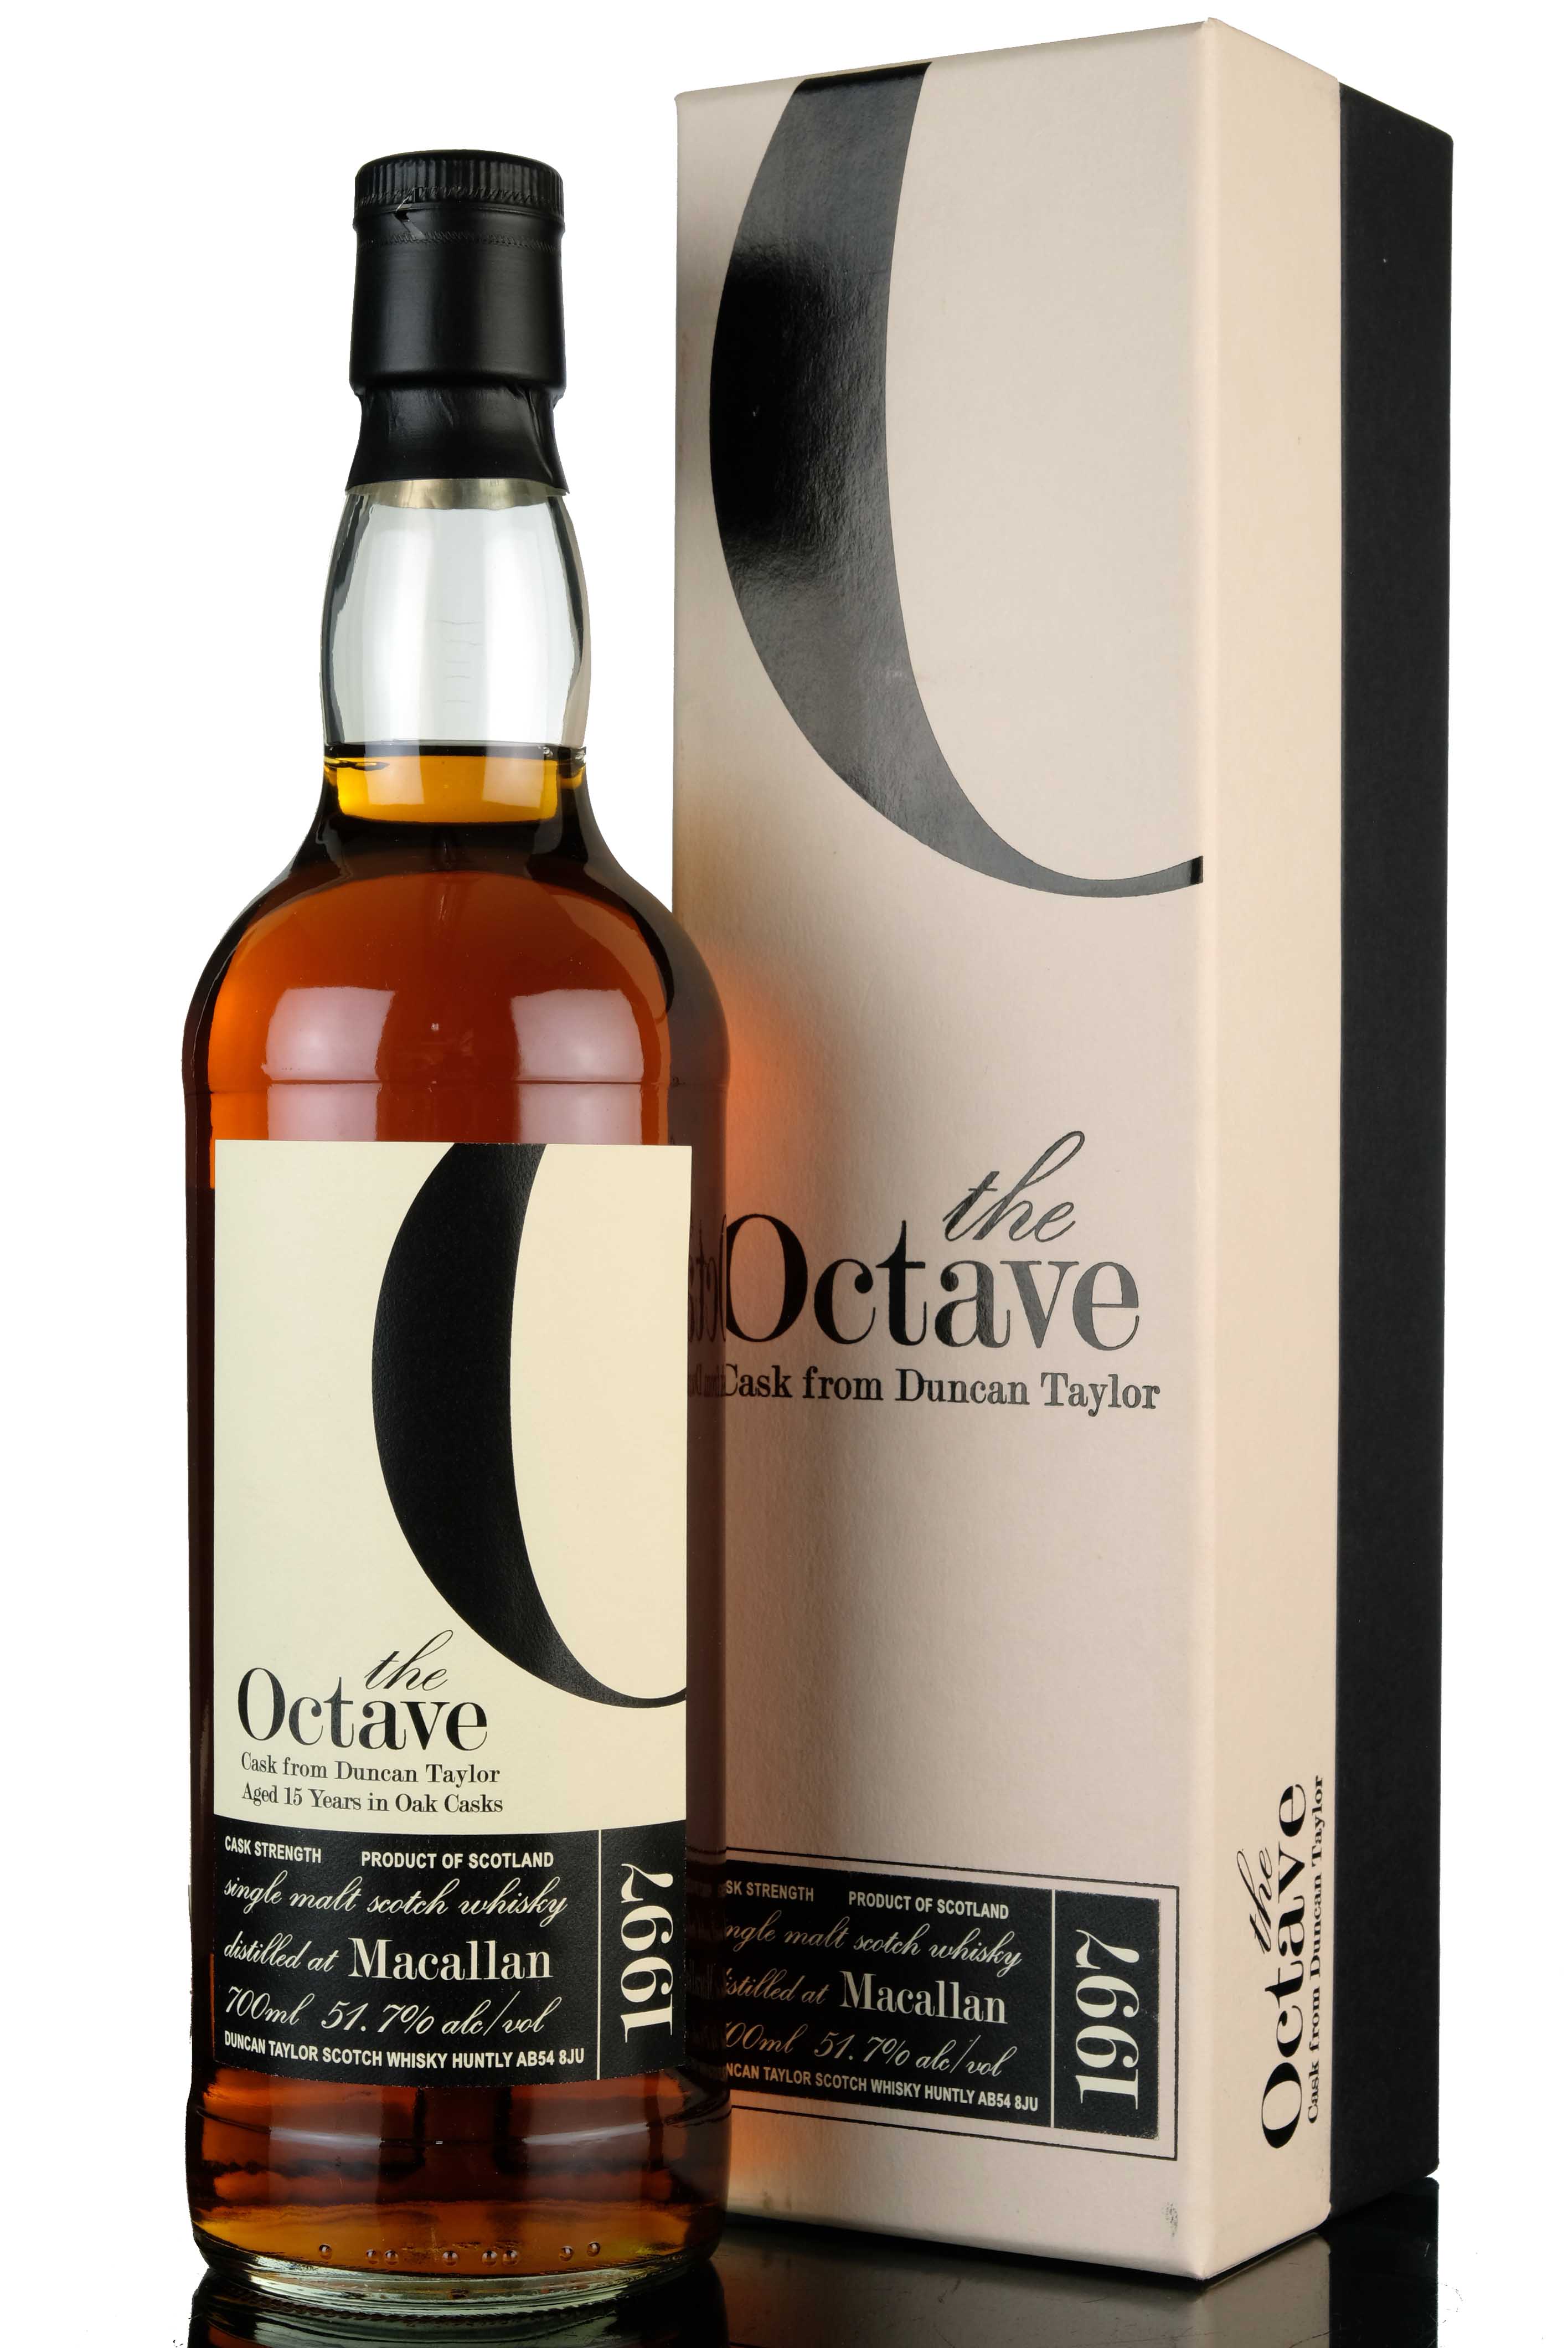 Macallan 1997-2013 - 15 Year Old - Duncan Taylor Octave - Single Cask 724713